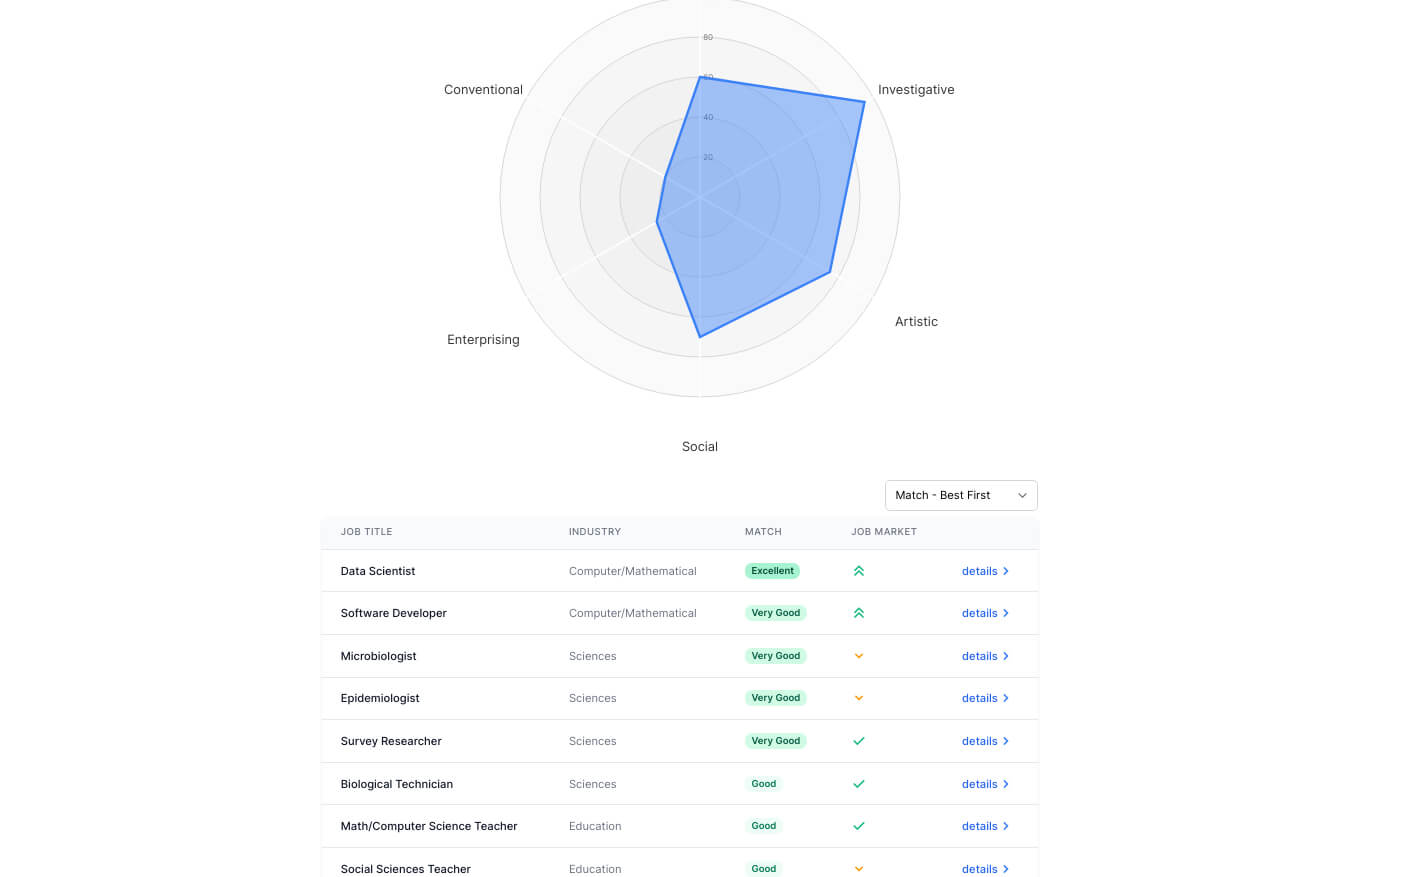 TraitLab uses your career interest profile and occupational data to allow you to search potential career paths, while the StrengthsFinder 2.0 provides more general strength-based guidance that is not tailored to any specific occupational area.